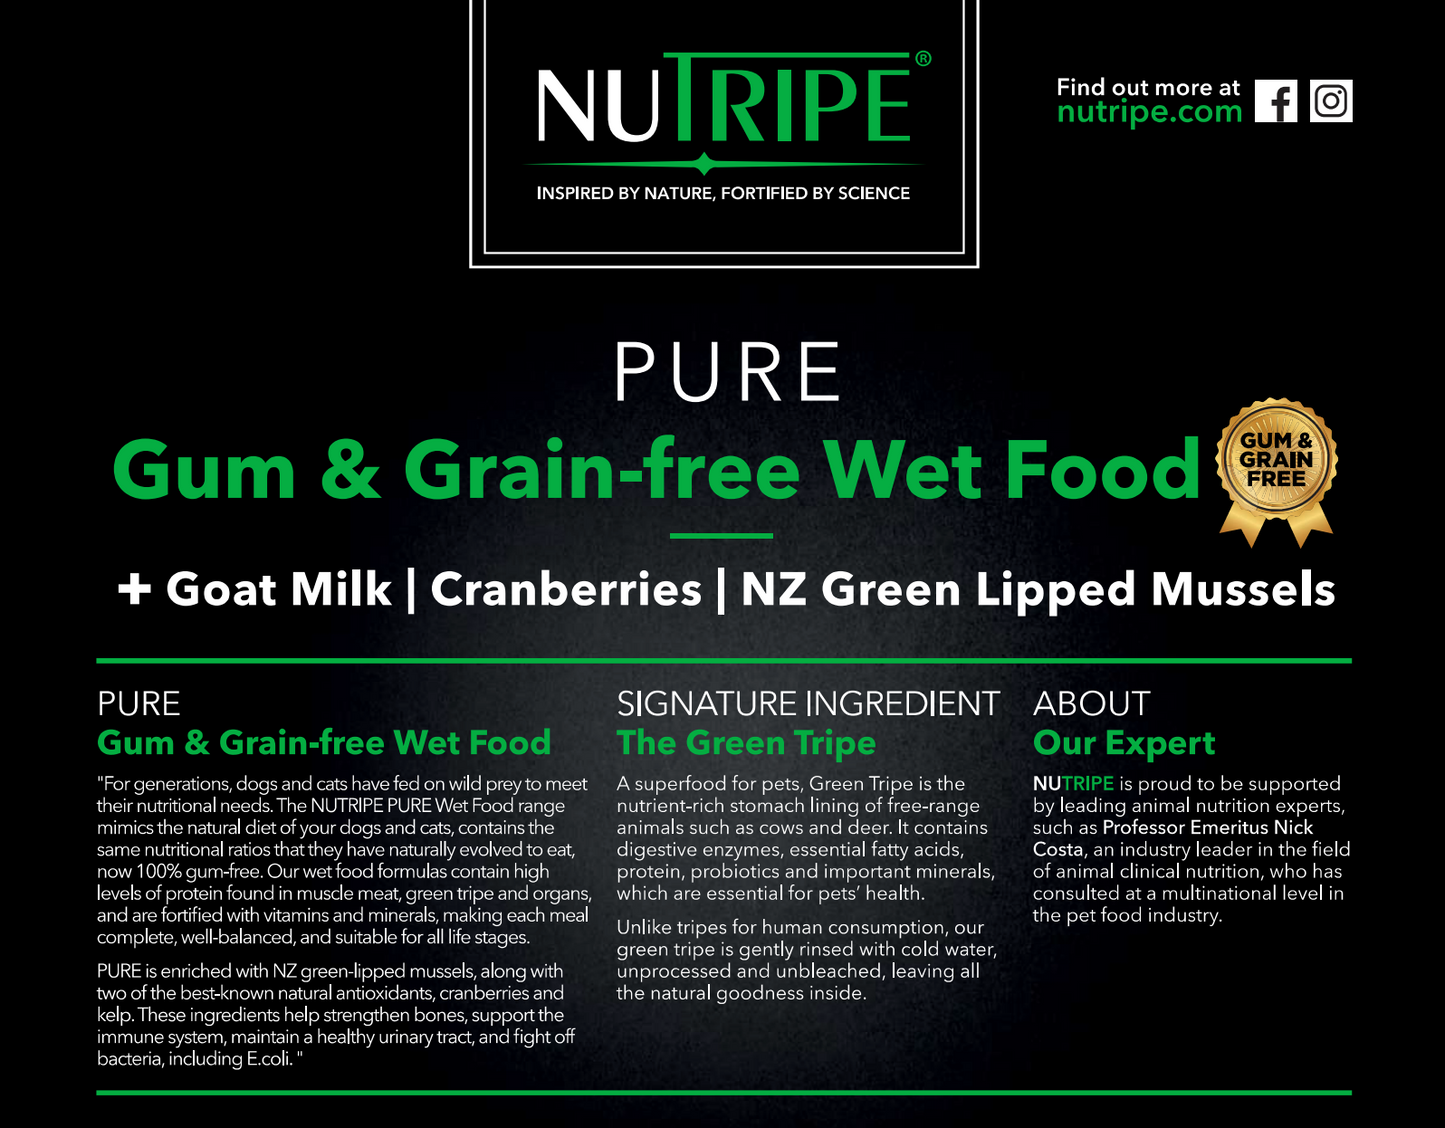 Your Whole Dog's NUTRIPE PURE Salmon & Green Tripe Dog Food (185g cans) is a gum and grain free wet food.